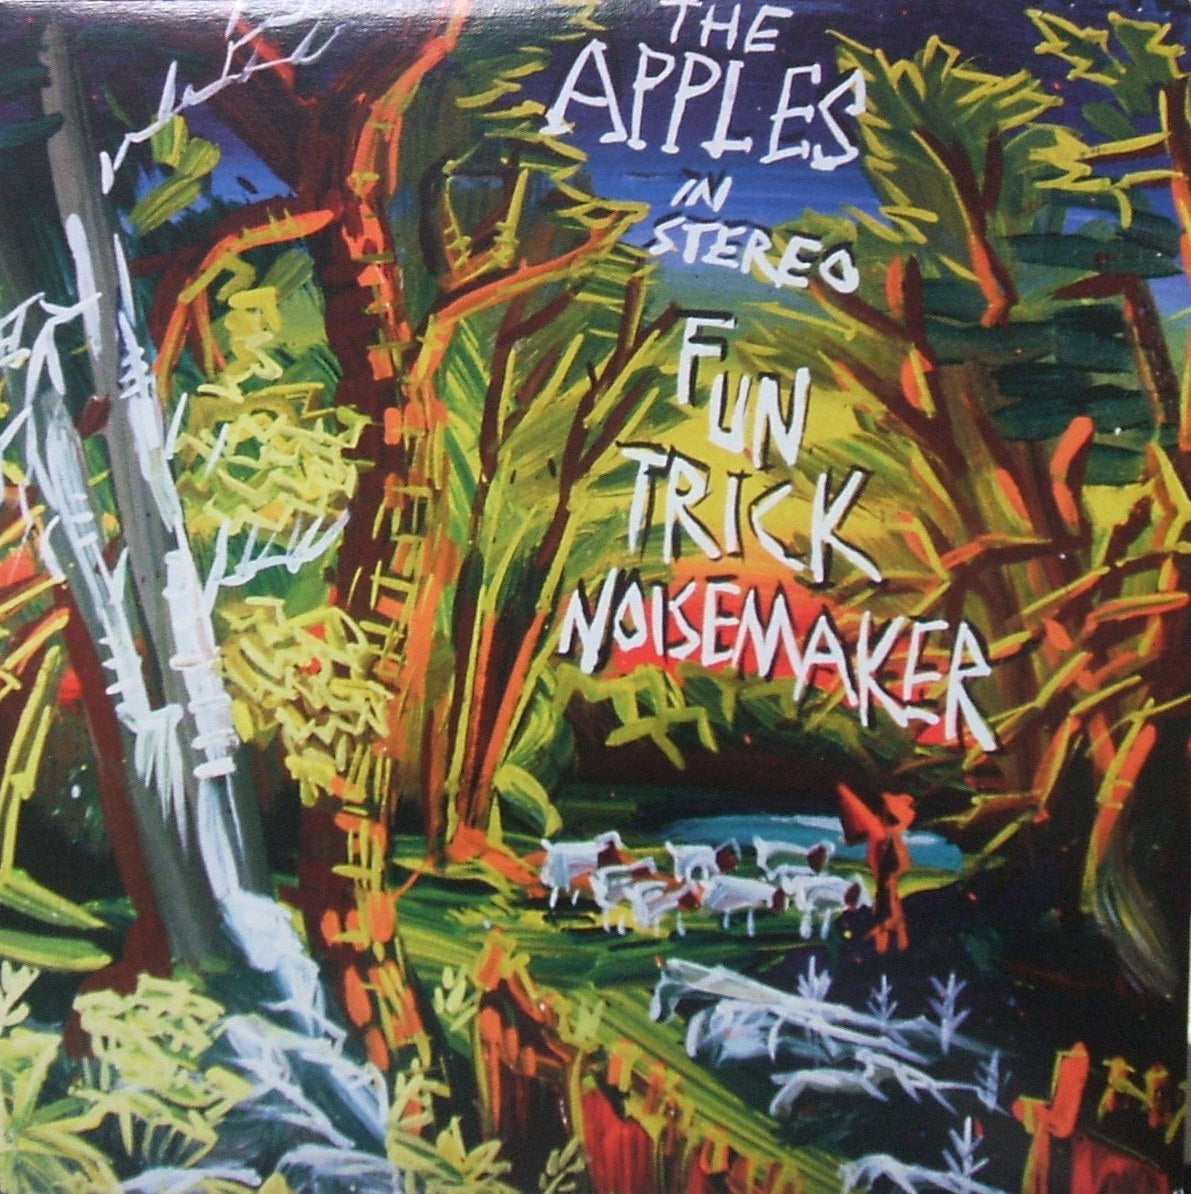 The apples in stereo  LP レコード